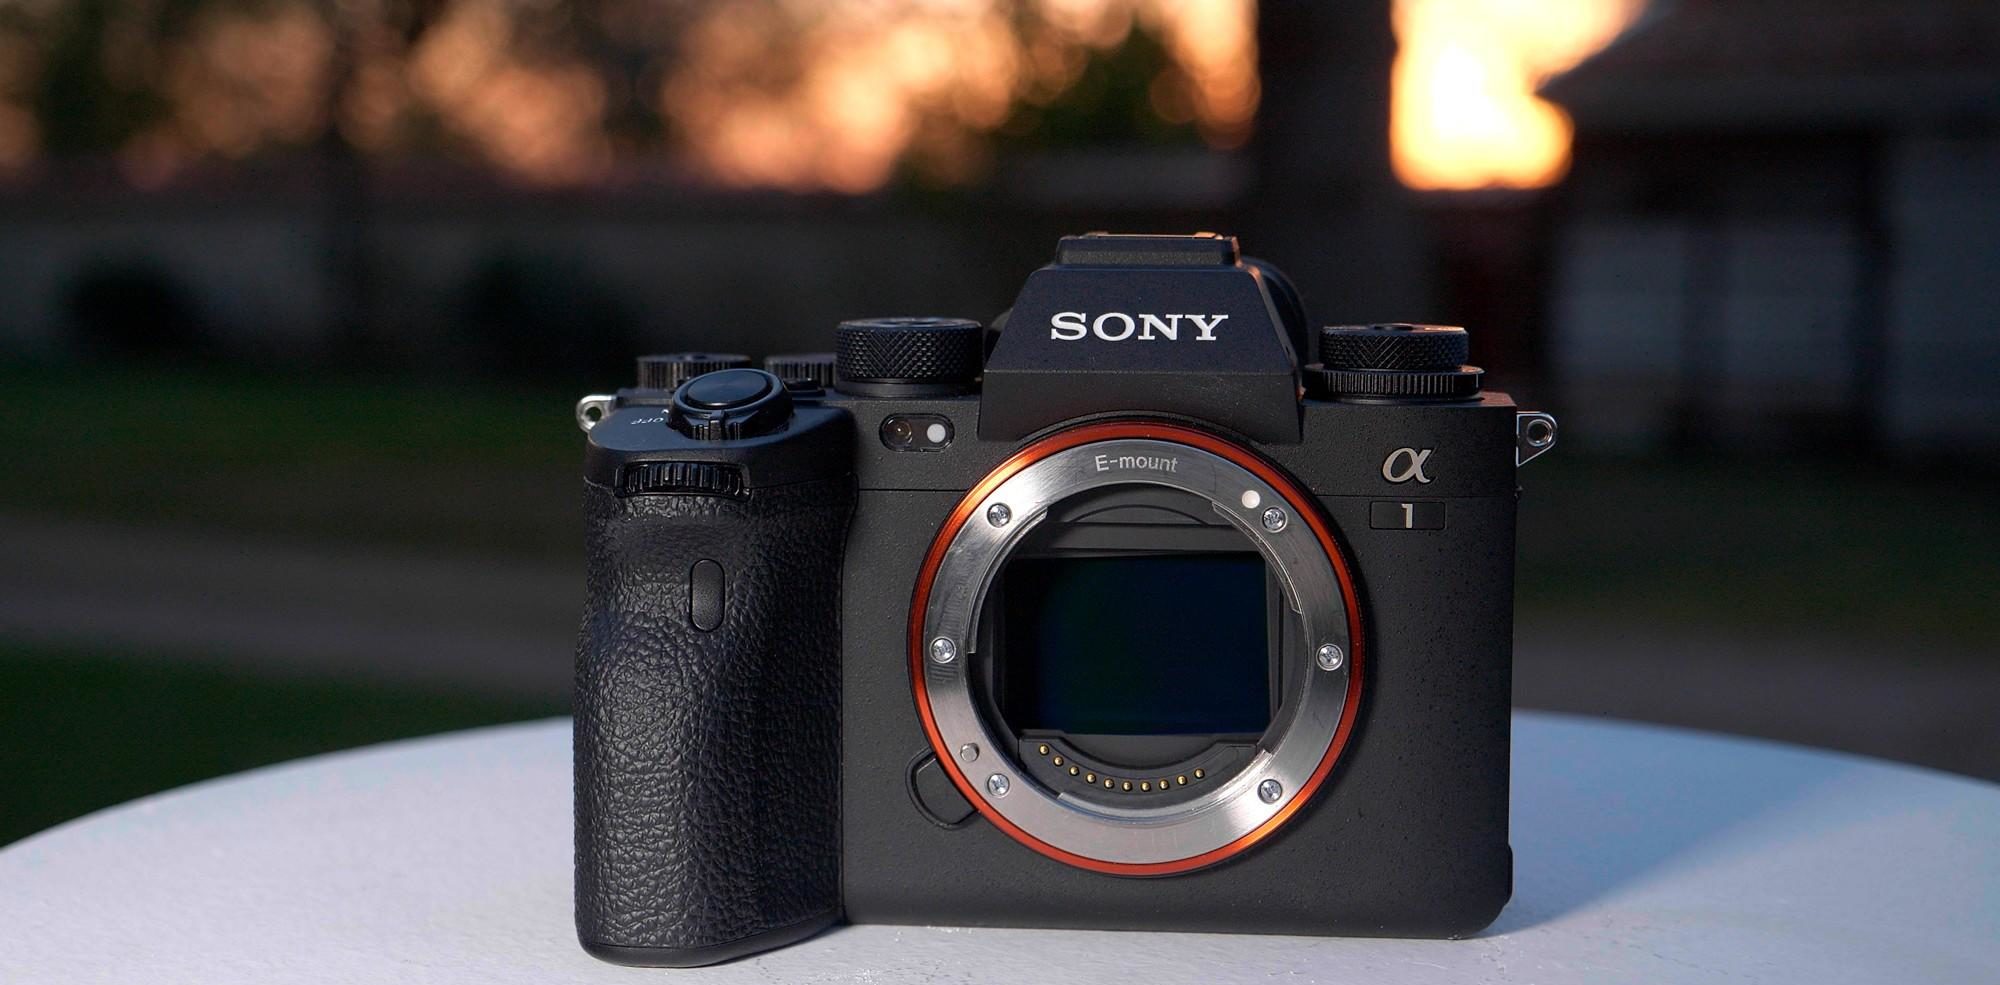 DSLR camera and replaced by Mirrorless